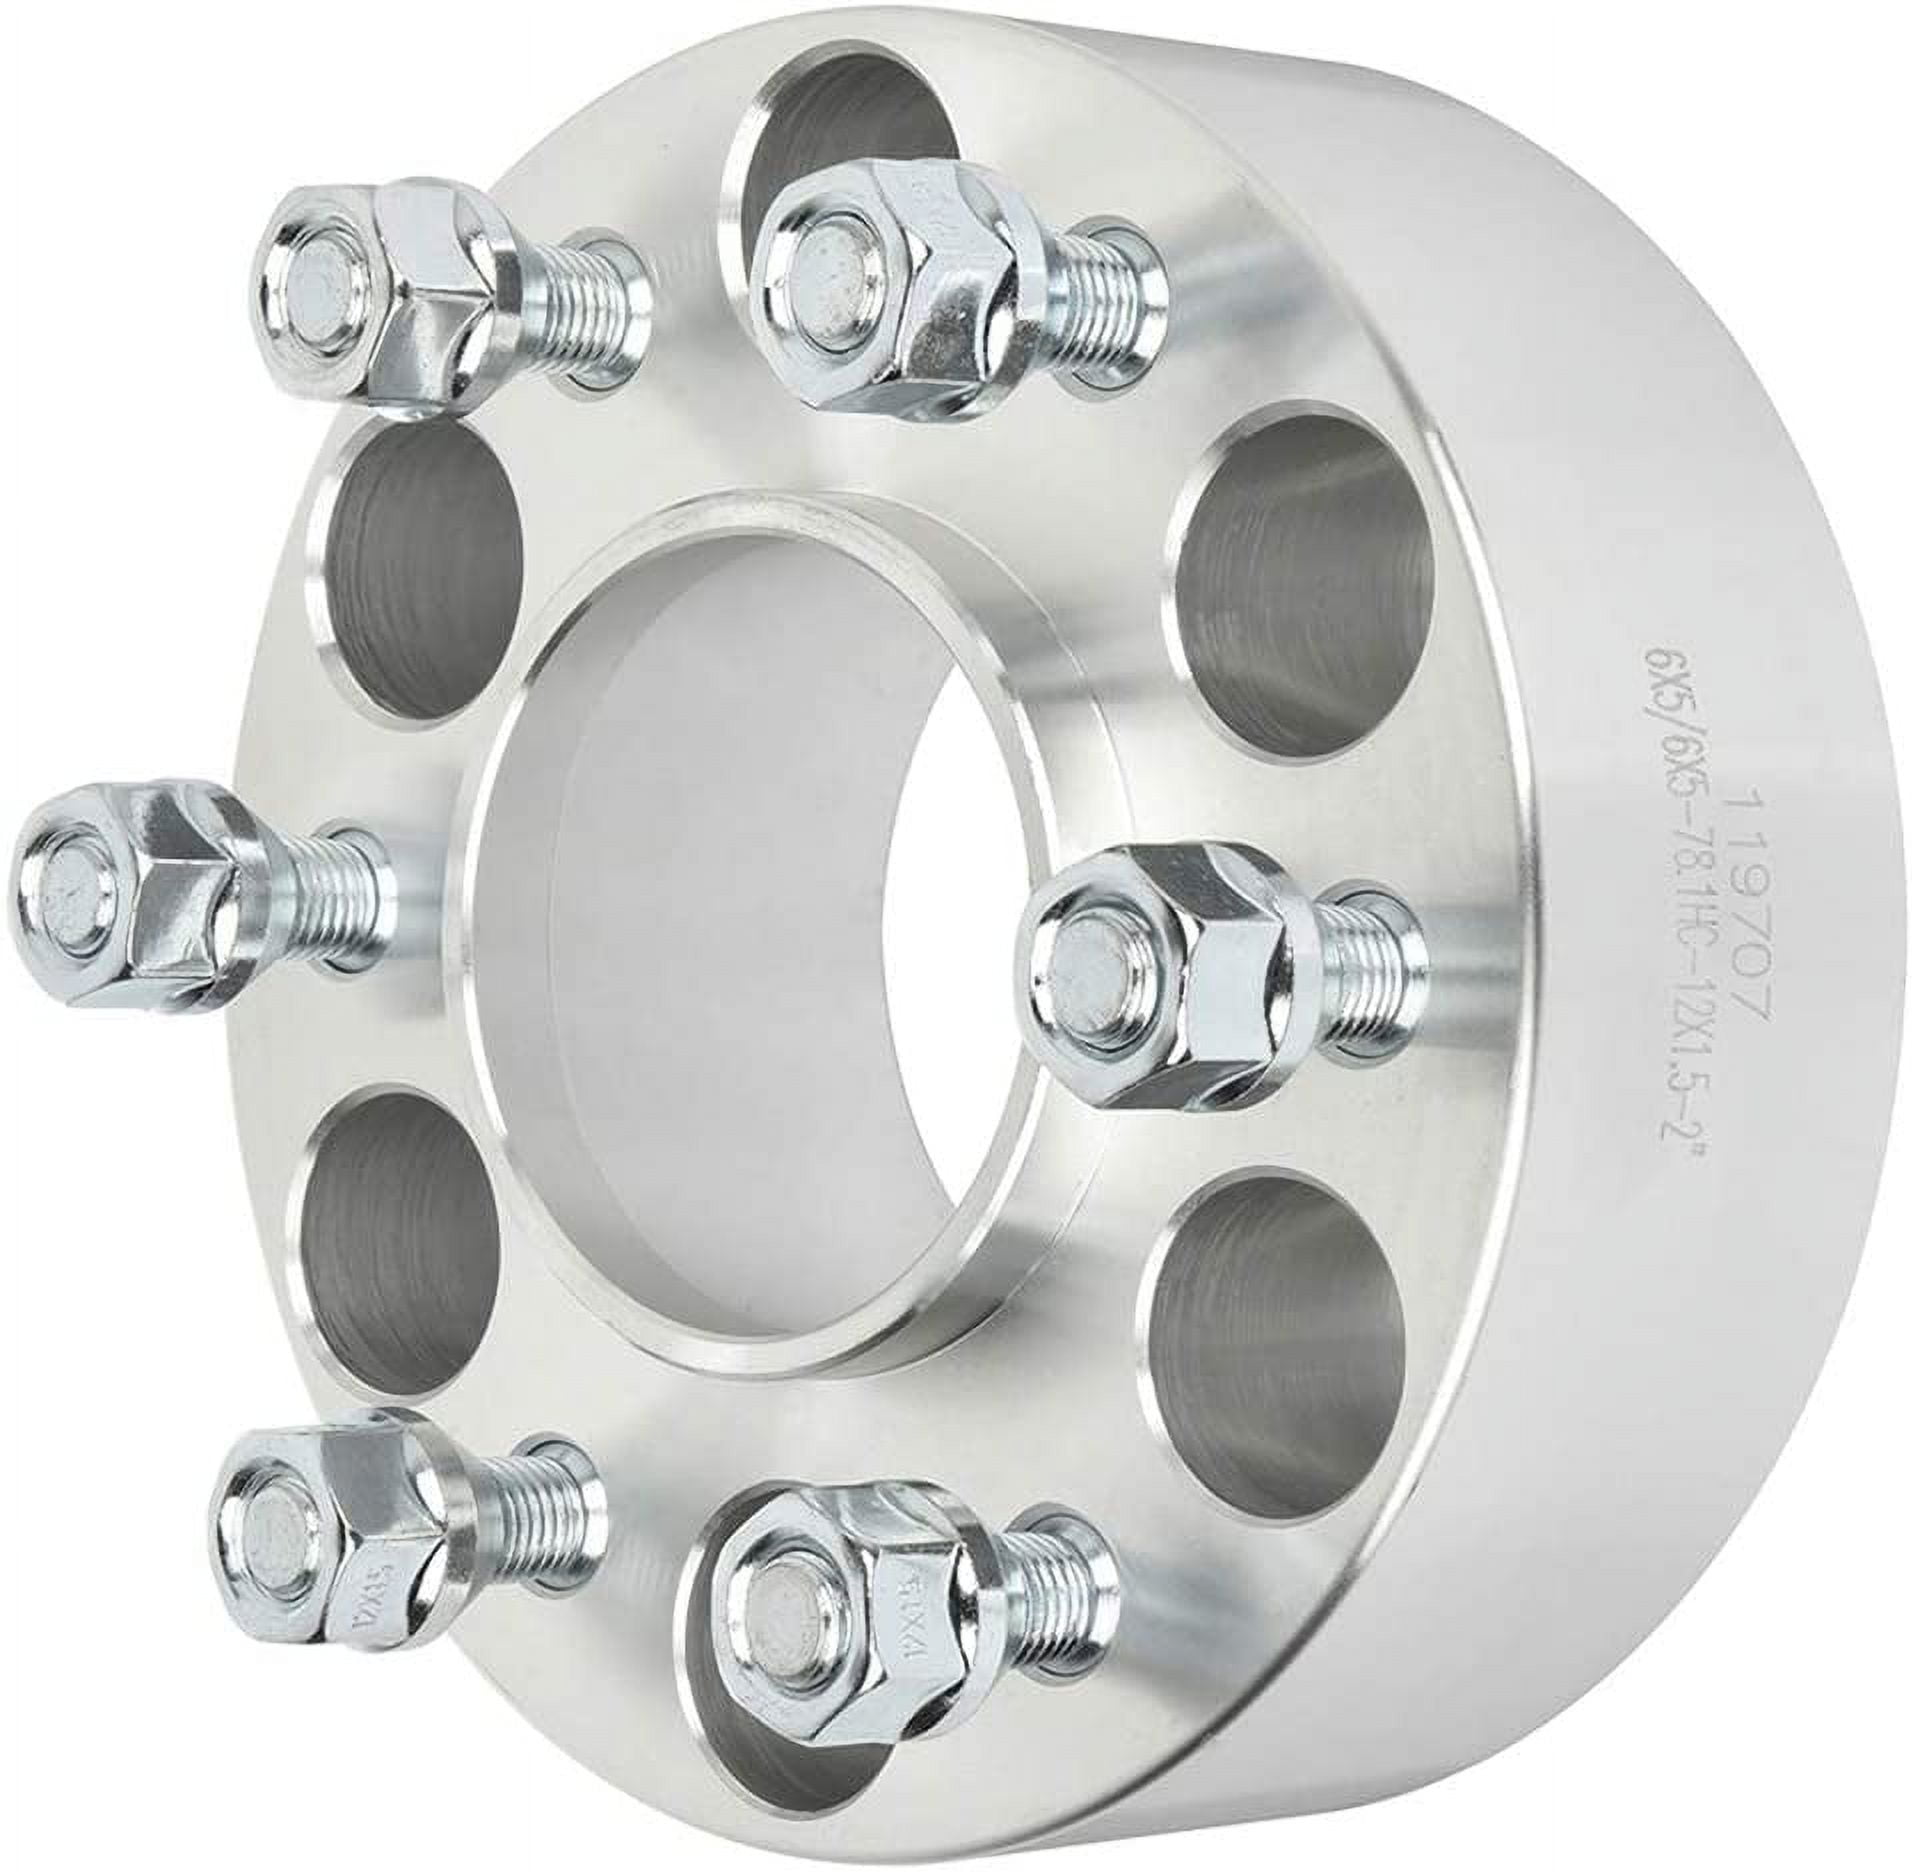 ECCPP 4PCS 6 Lug hubcentric Wheel Spacers Adapters 6x5 to 6x5 12x1